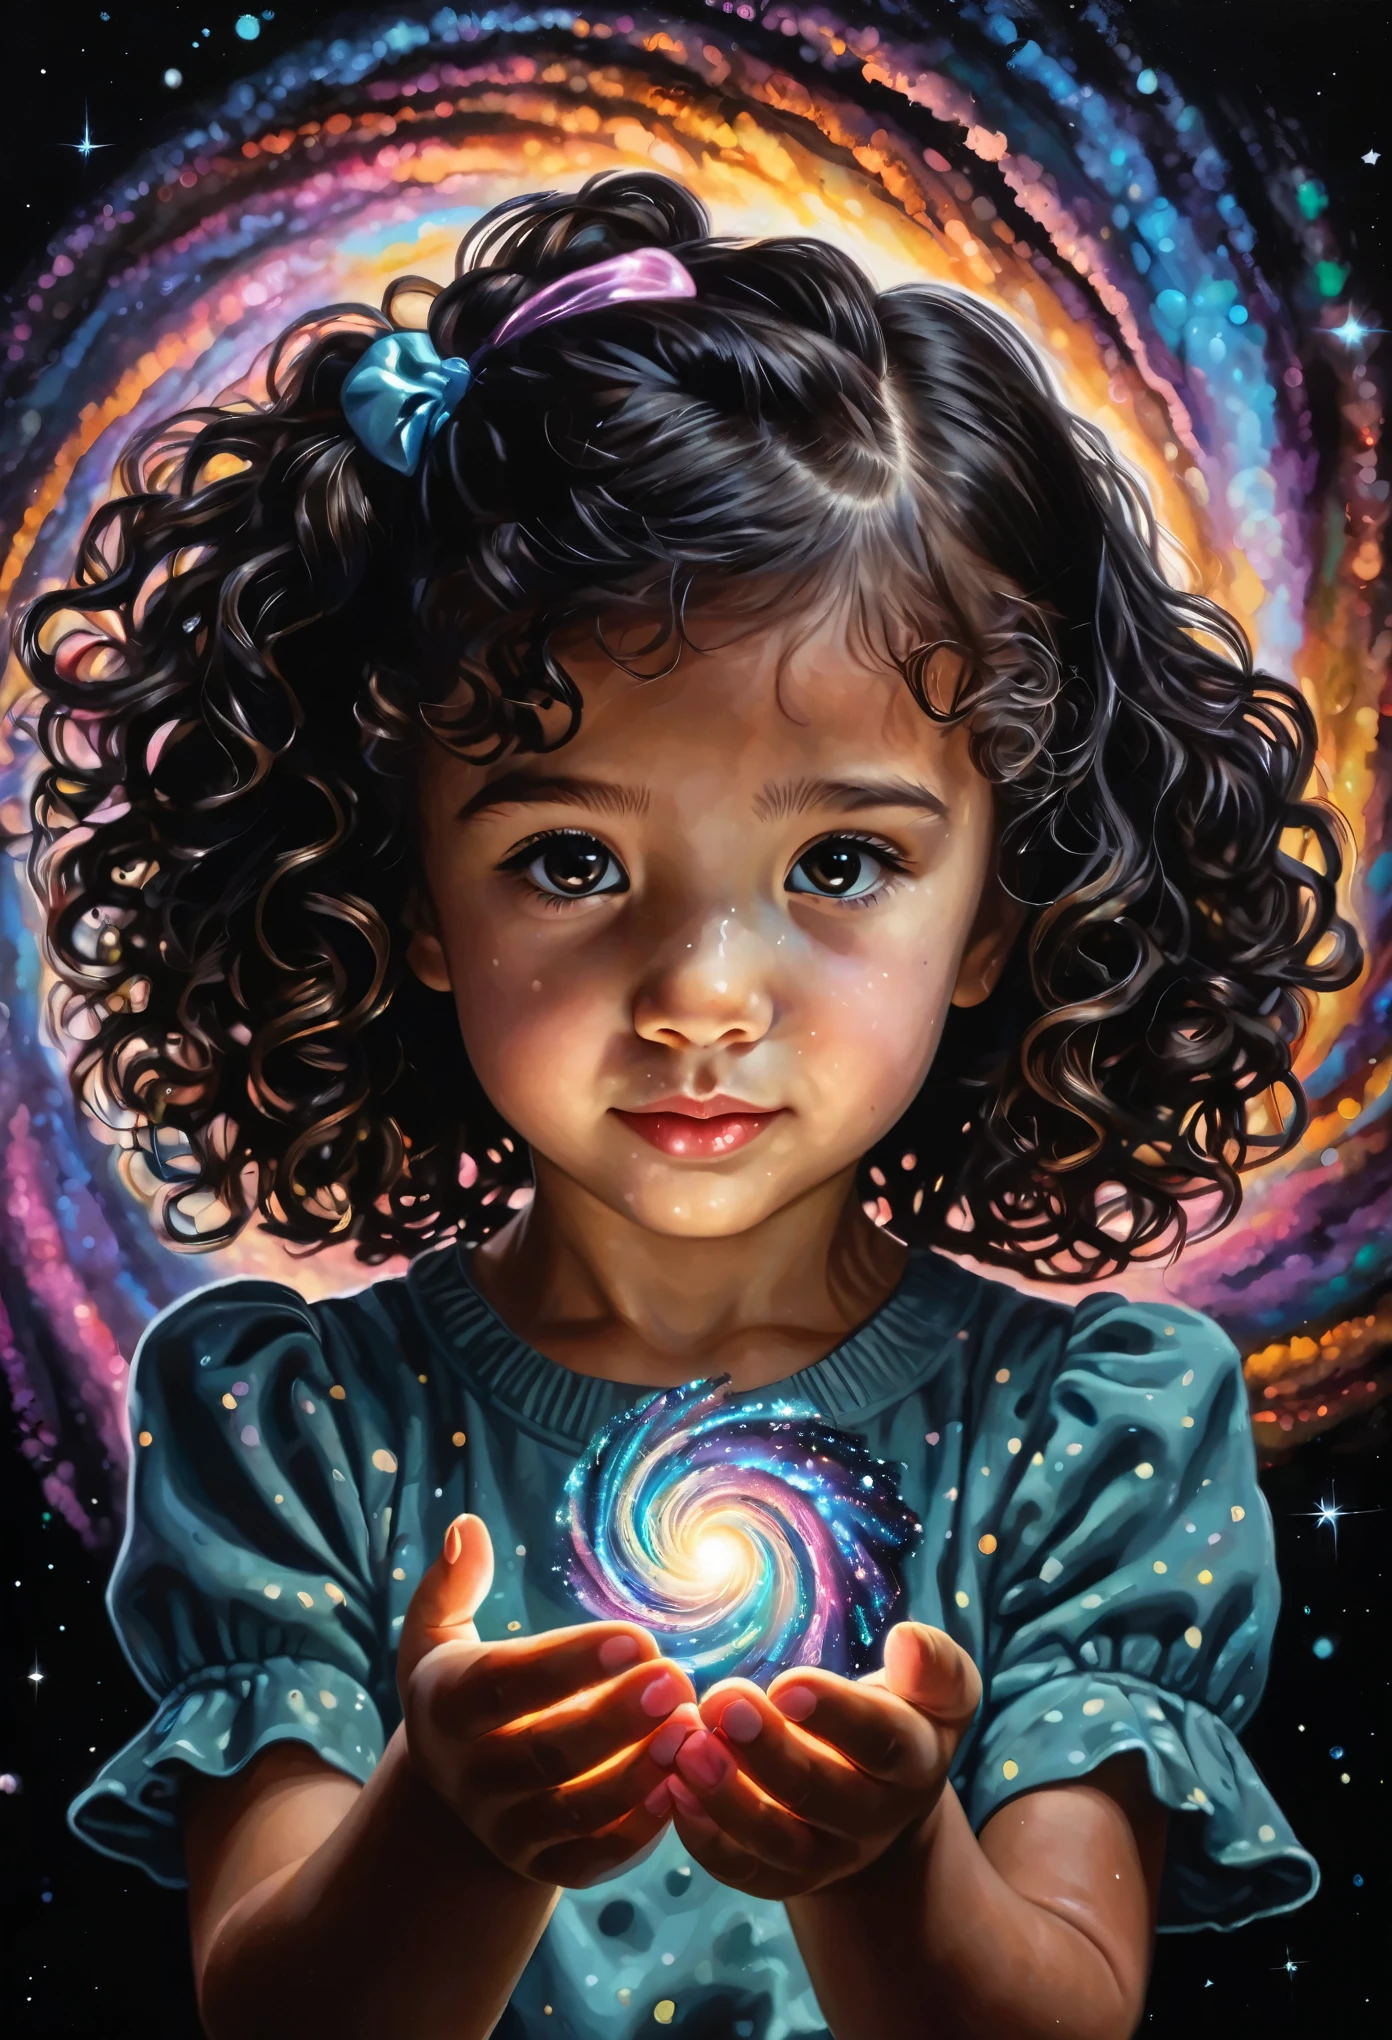 illustration，painting，acrylic painting，，Holding a bright spiral galaxy between hands，Glowing special effects，black background，Super fine，Super realistic，Real light and shadow contrast，Realistic ray tracing，True light falloff，True light reflection，anti-aesthetic style，Poodlepunk，Snapshot aesthetic style